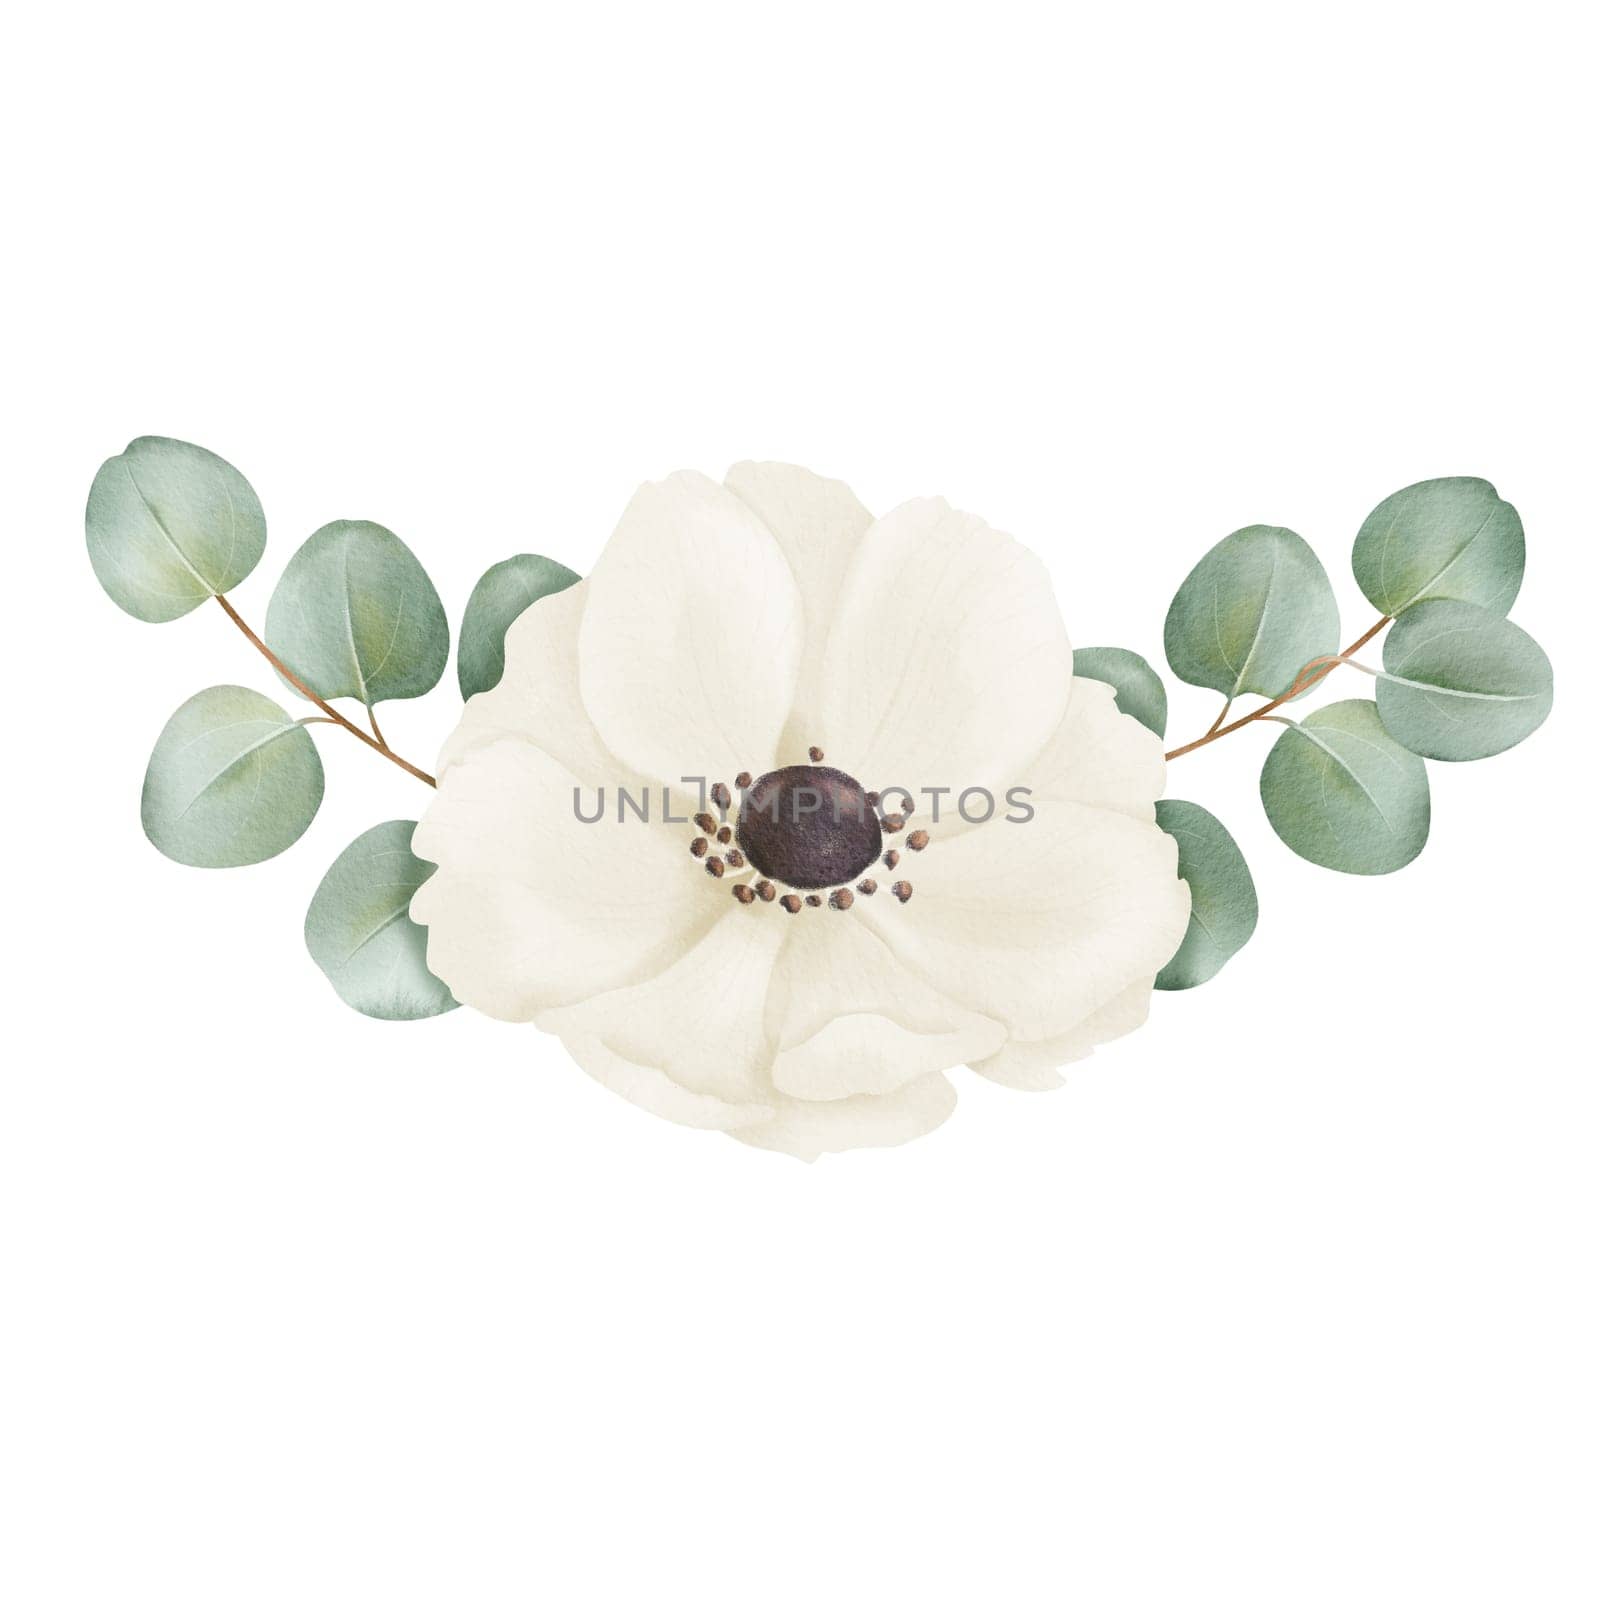 A composition white anemone flowers accompanied by eucalyptus leaves, in a watercolor. for design applications, wedding invitations, floral-themed stationery digital backgrounds or decorative prints by Art_Mari_Ka